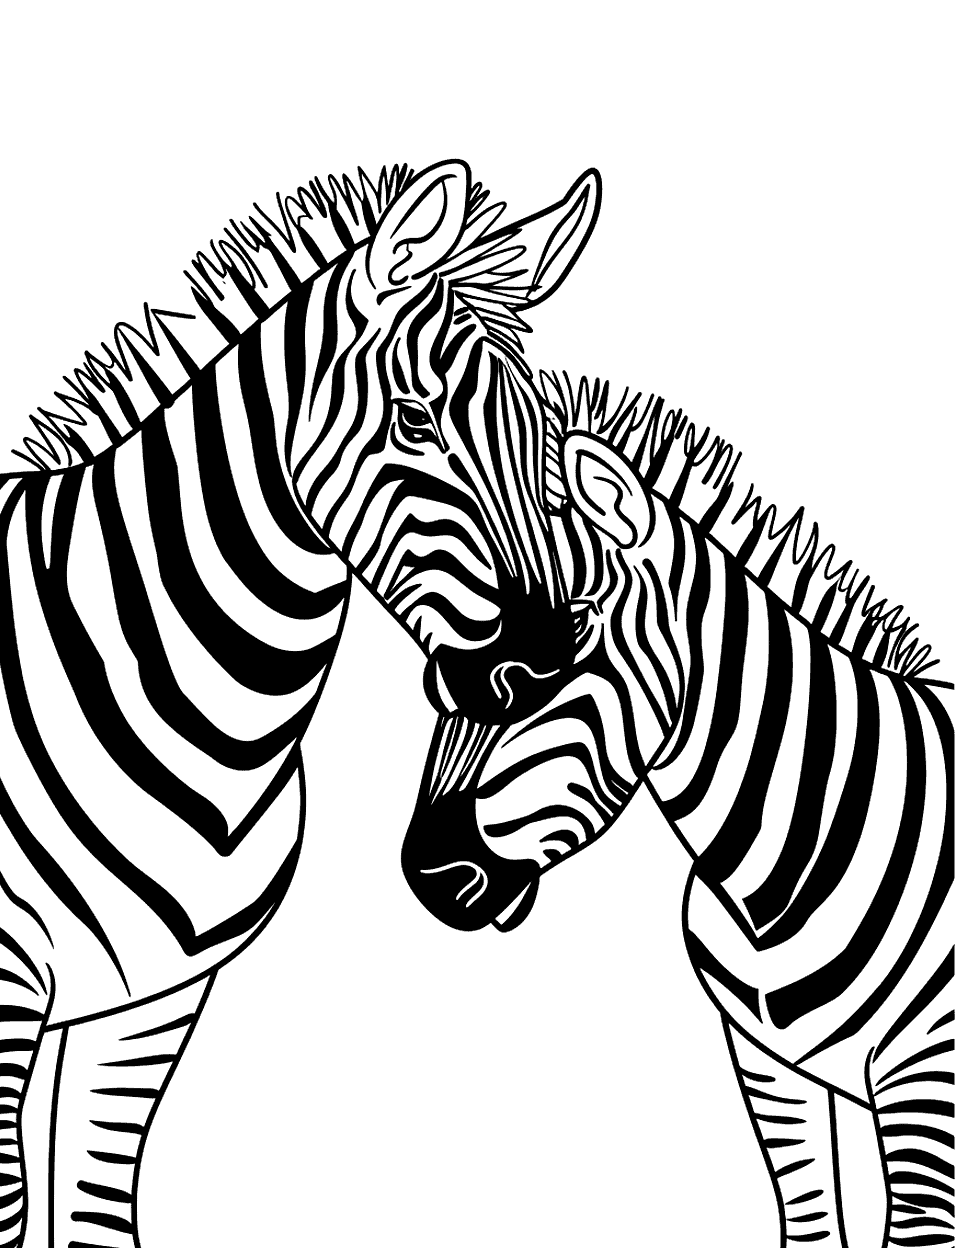 Two Zebras Nuzzling Zebra Coloring Page - A pair of zebras nuzzling each other affectionately.